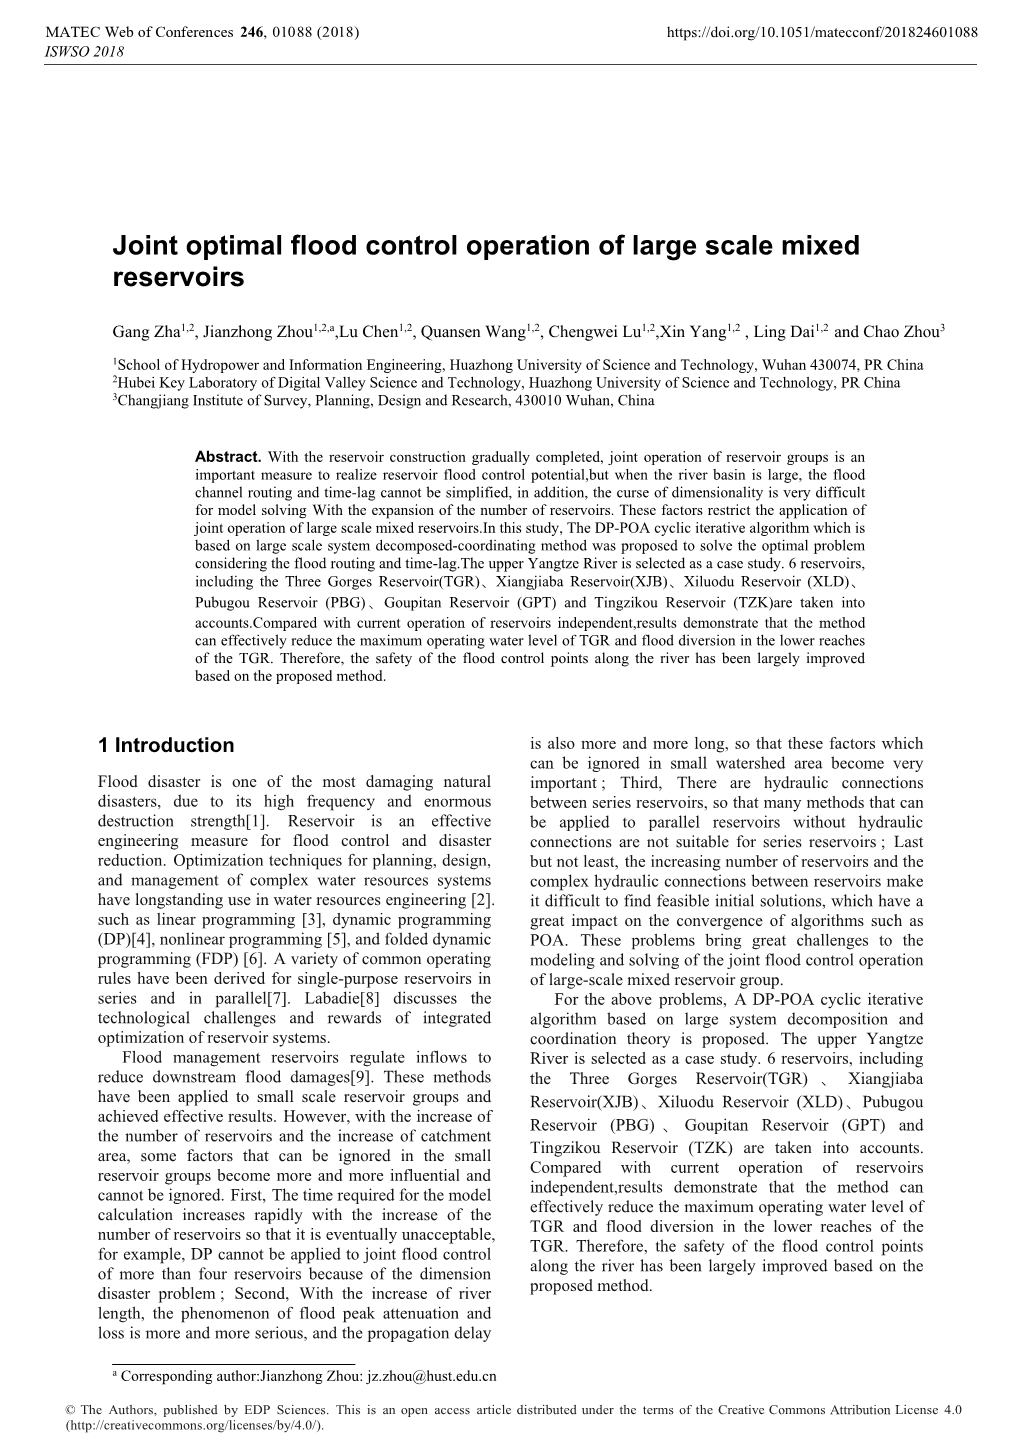 Joint Optimal Flood Control Operation of Large Scale Mixed Reservoirs